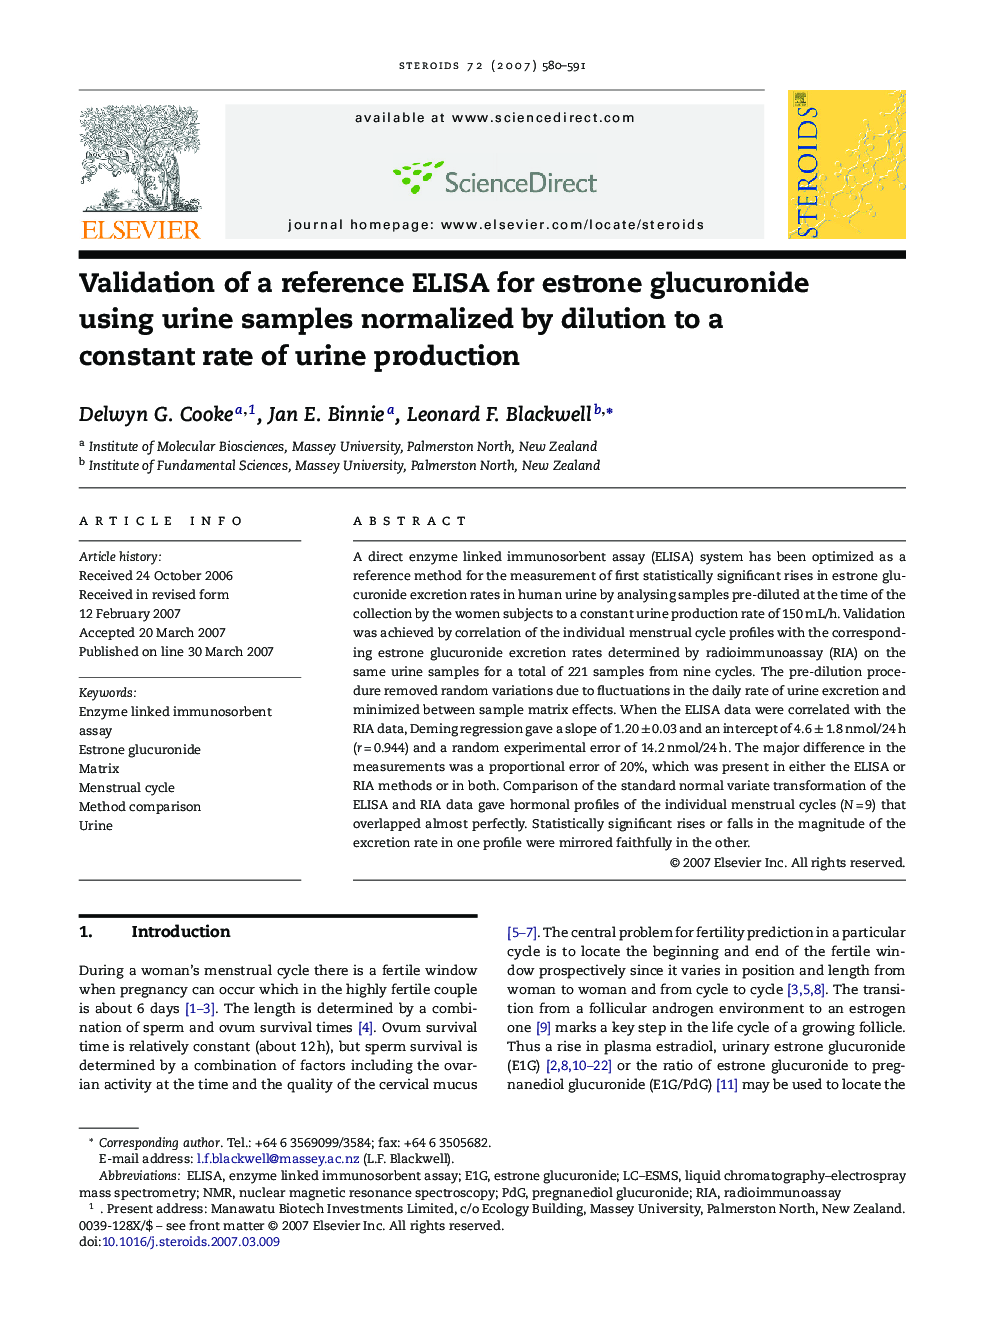 Validation of a reference ELISA for estrone glucuronide using urine samples normalized by dilution to a constant rate of urine production